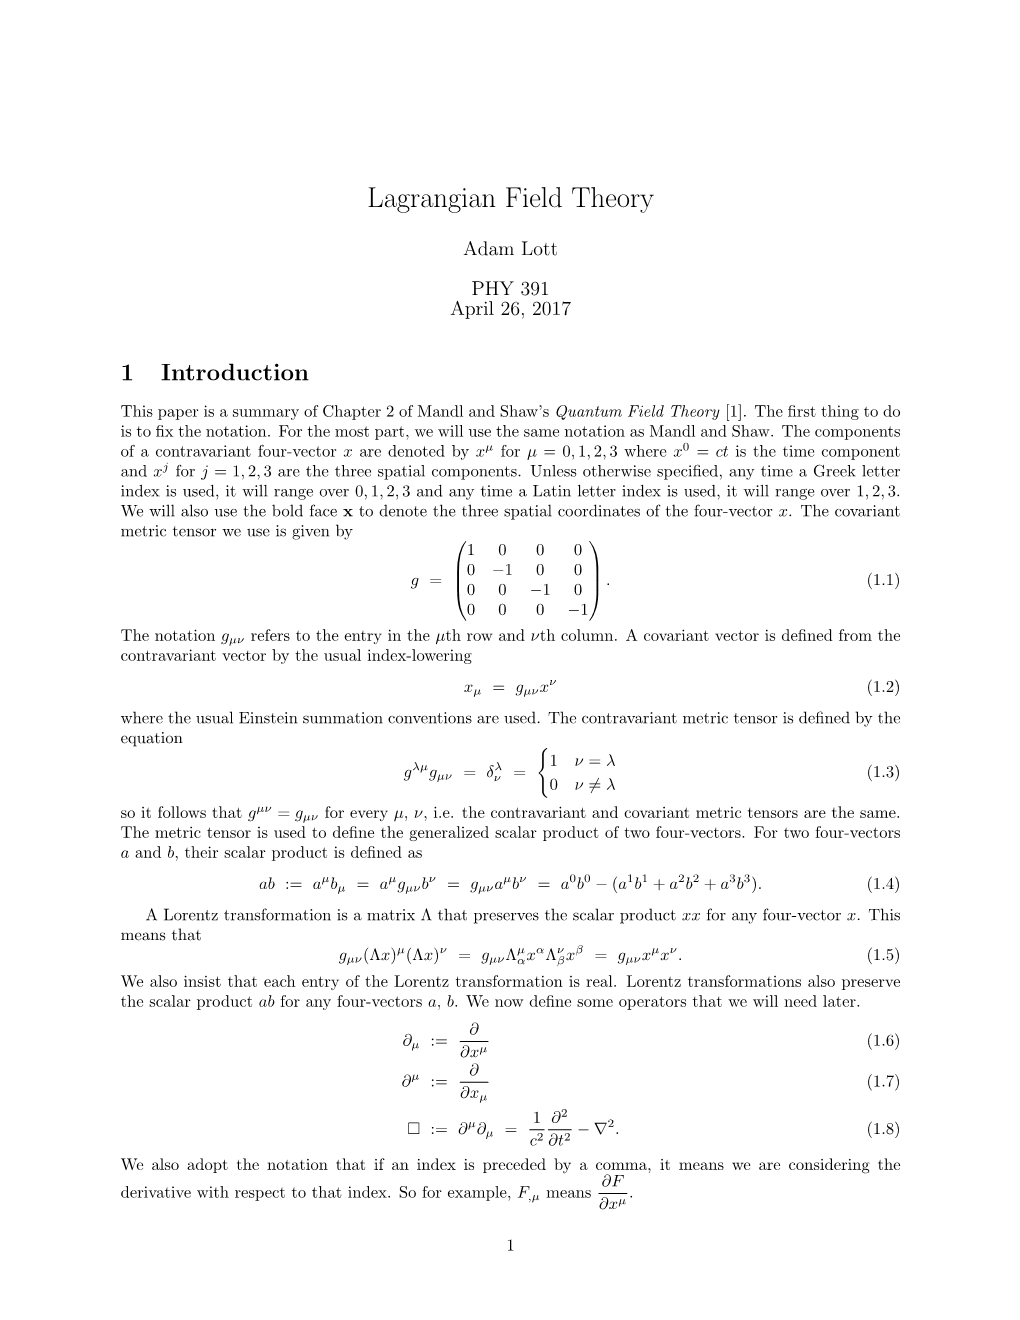 Introduction to Lagrangian Field Theory